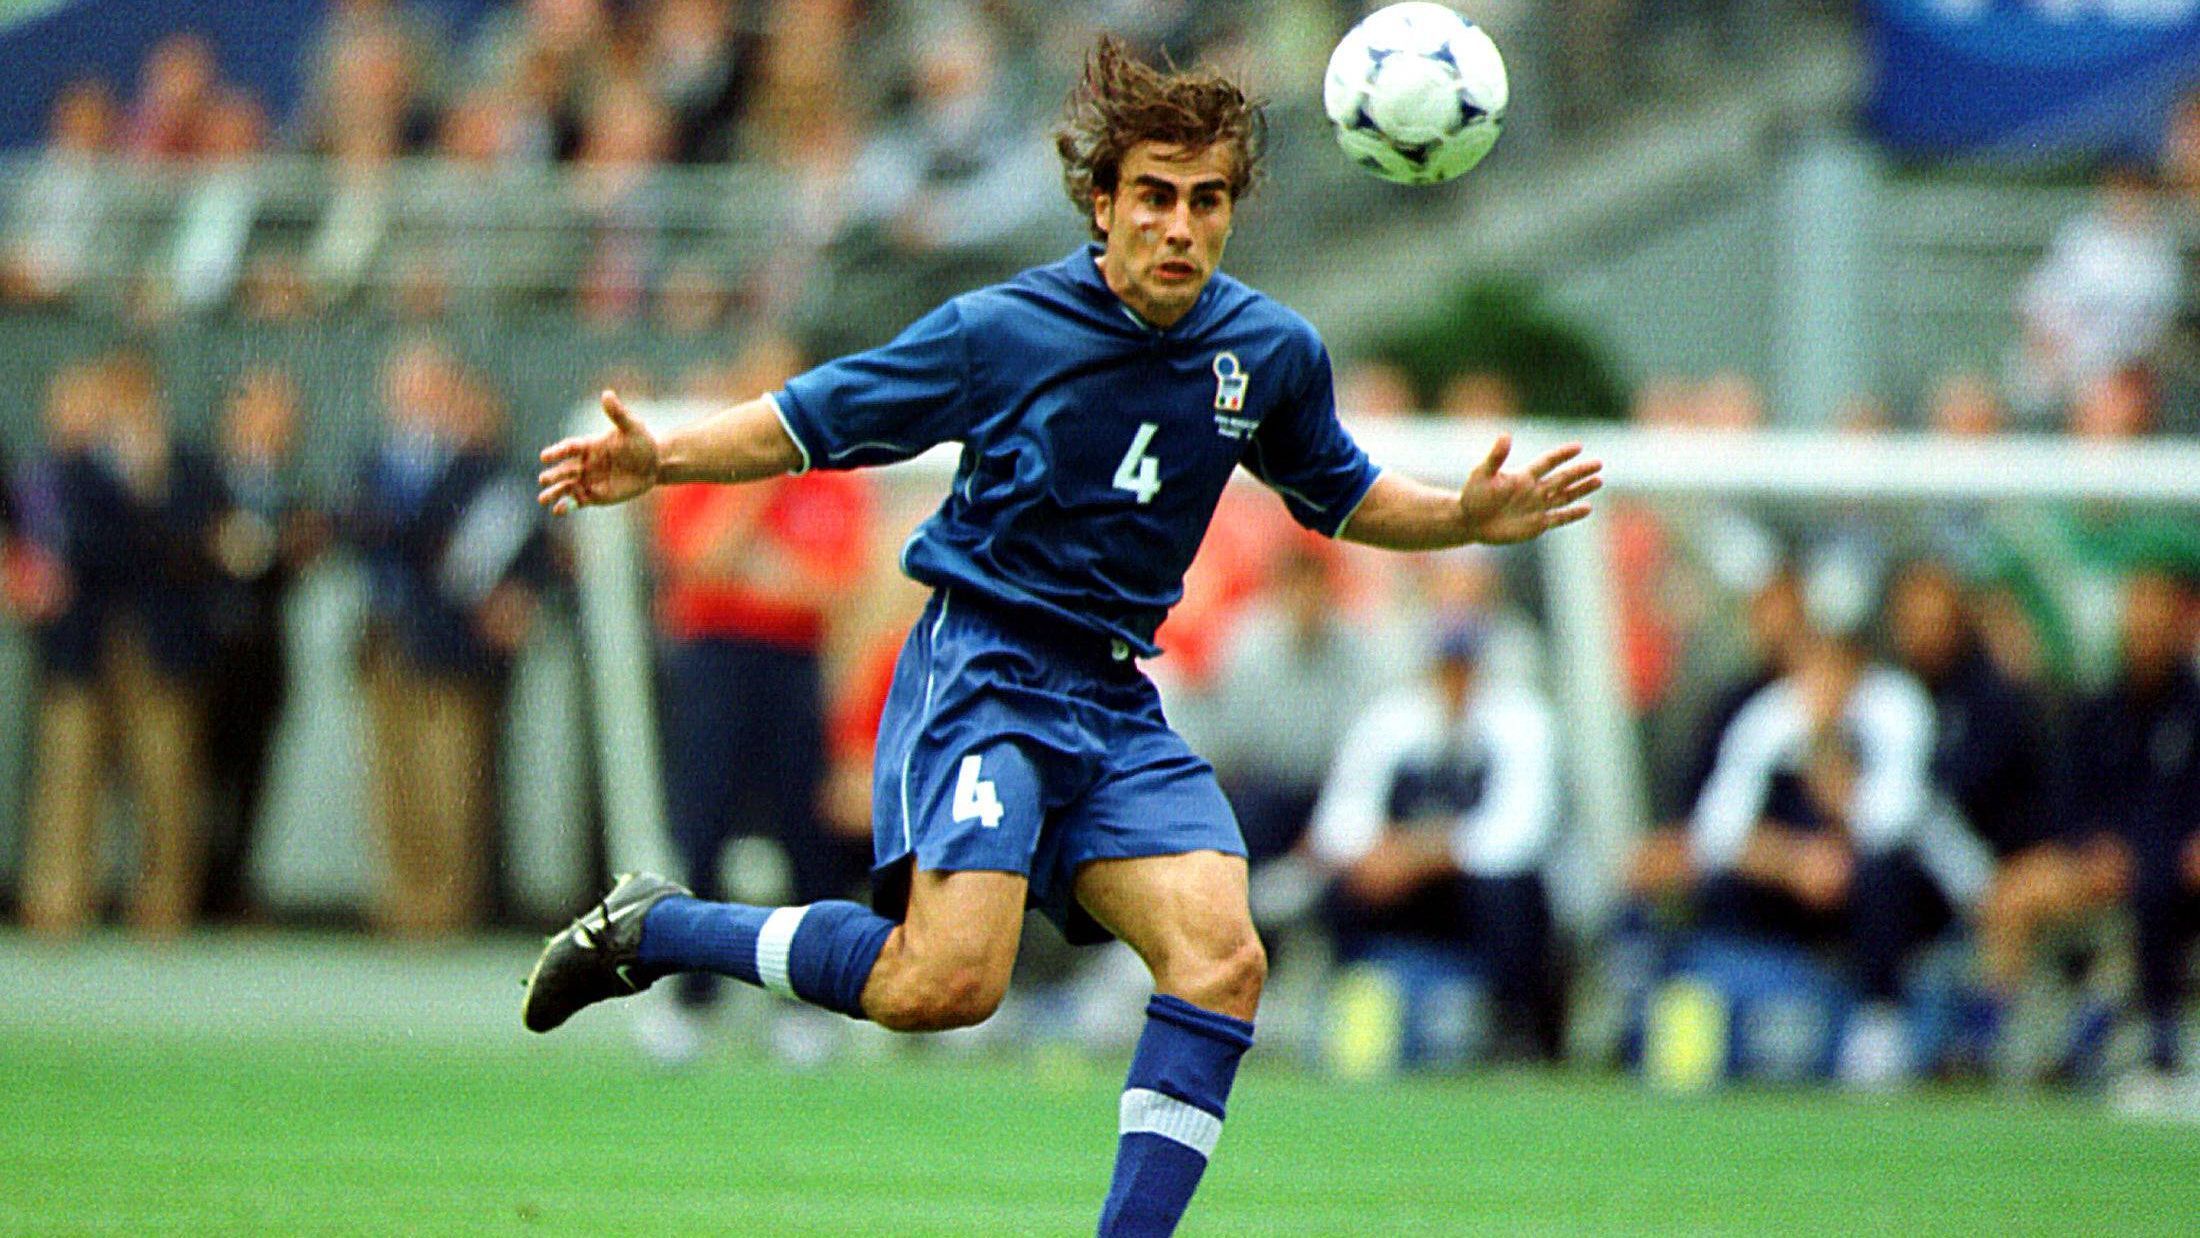 
                <strong>1996 - Fabio Cannavaro (Italien)</strong><br>
                &#x2022; <strong>Anzahl der A-Länderspiele:</strong> 136<br>&#x2022; <strong>spätere Erfolge: </strong>Weltmeister 2006<br>
              